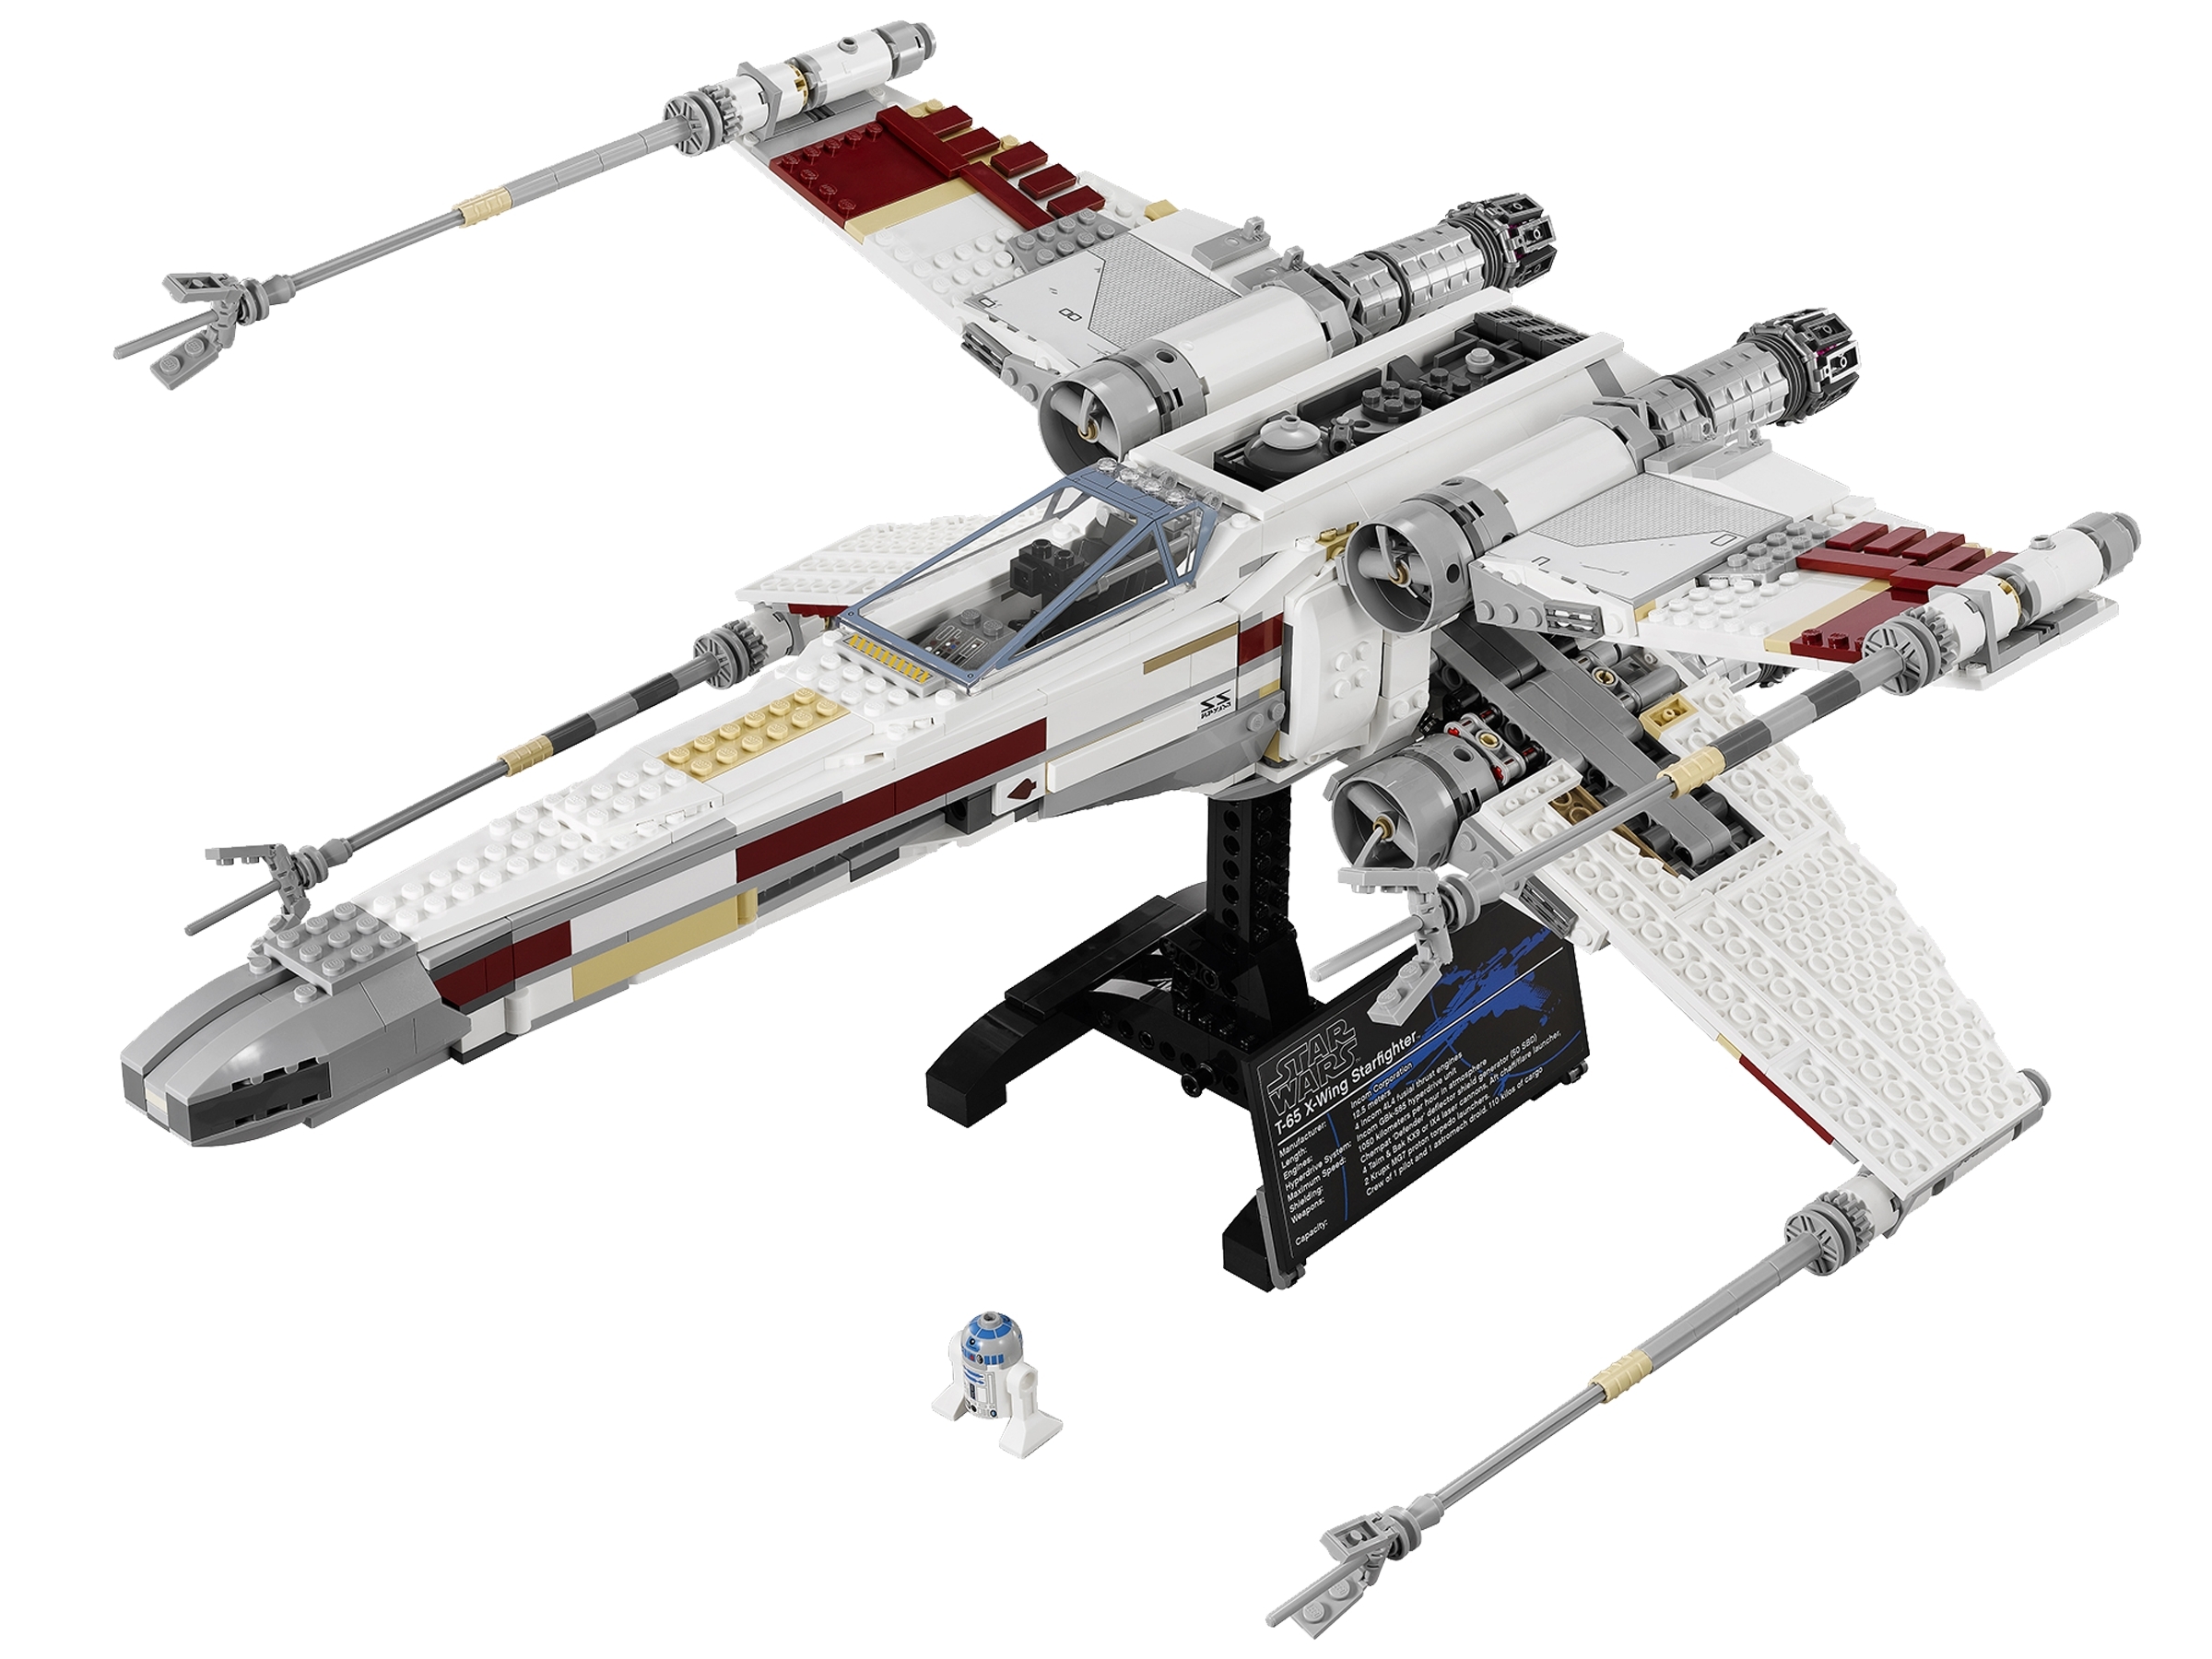 Red Five X-wing Starfighter™